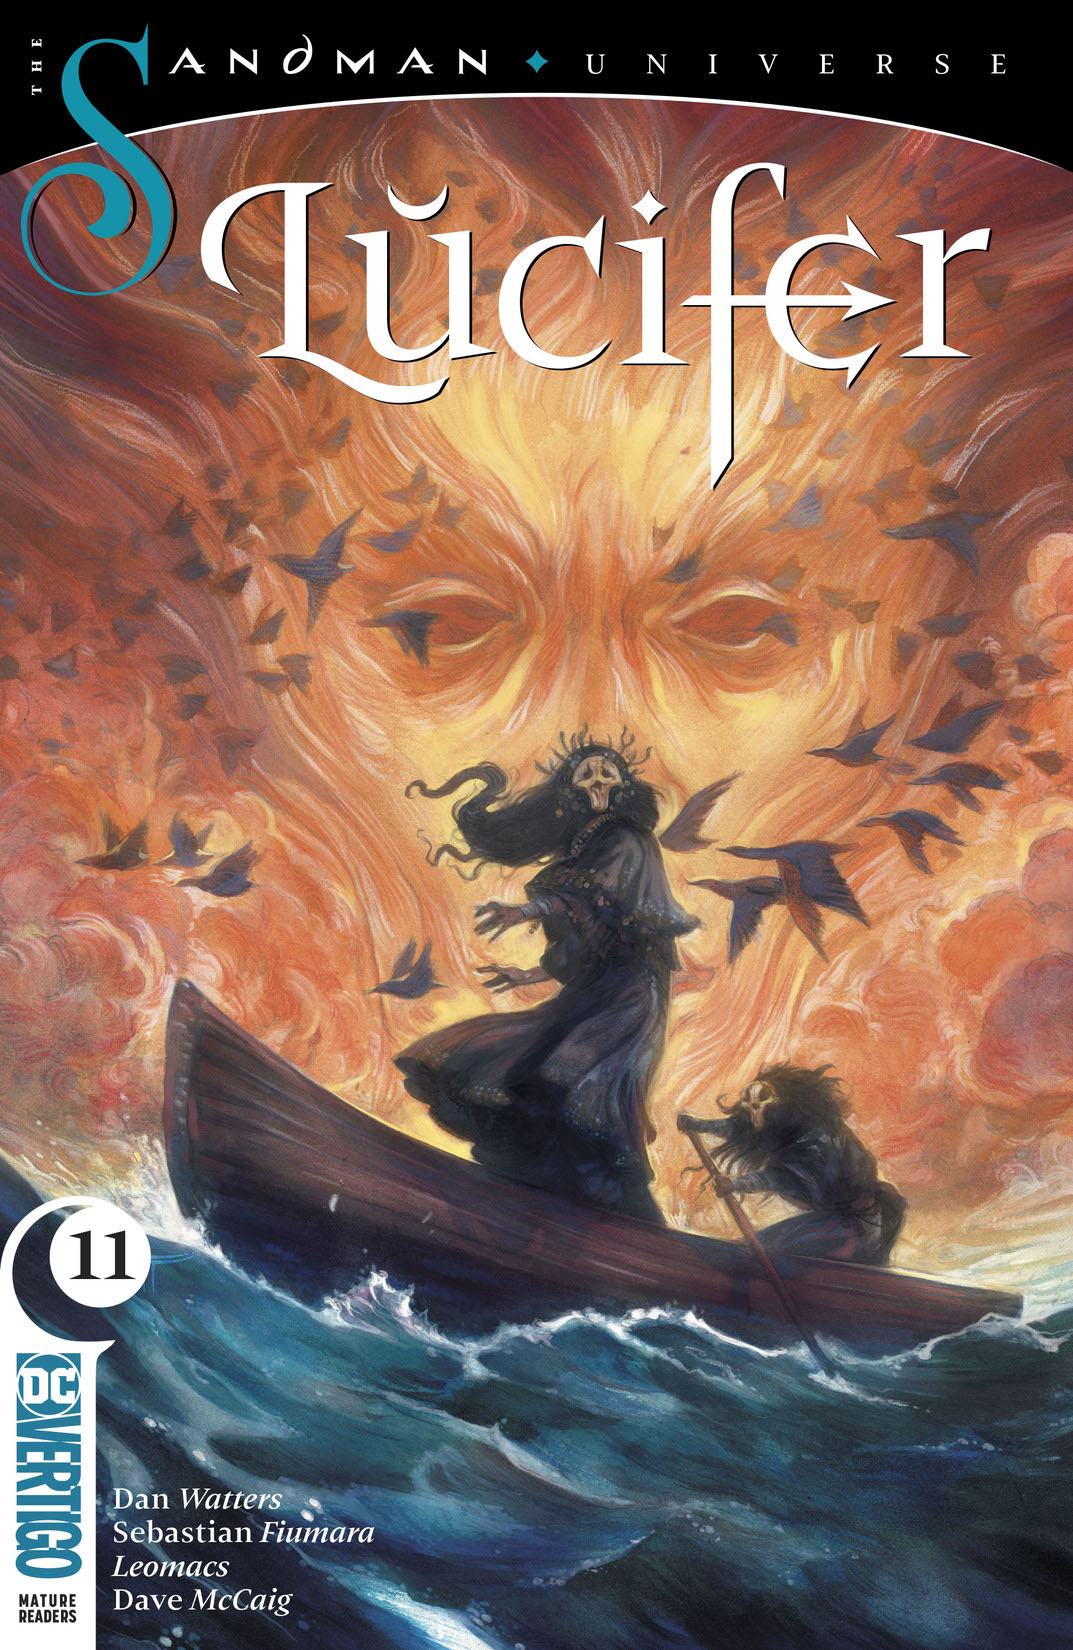 Lucifer #11 preview images